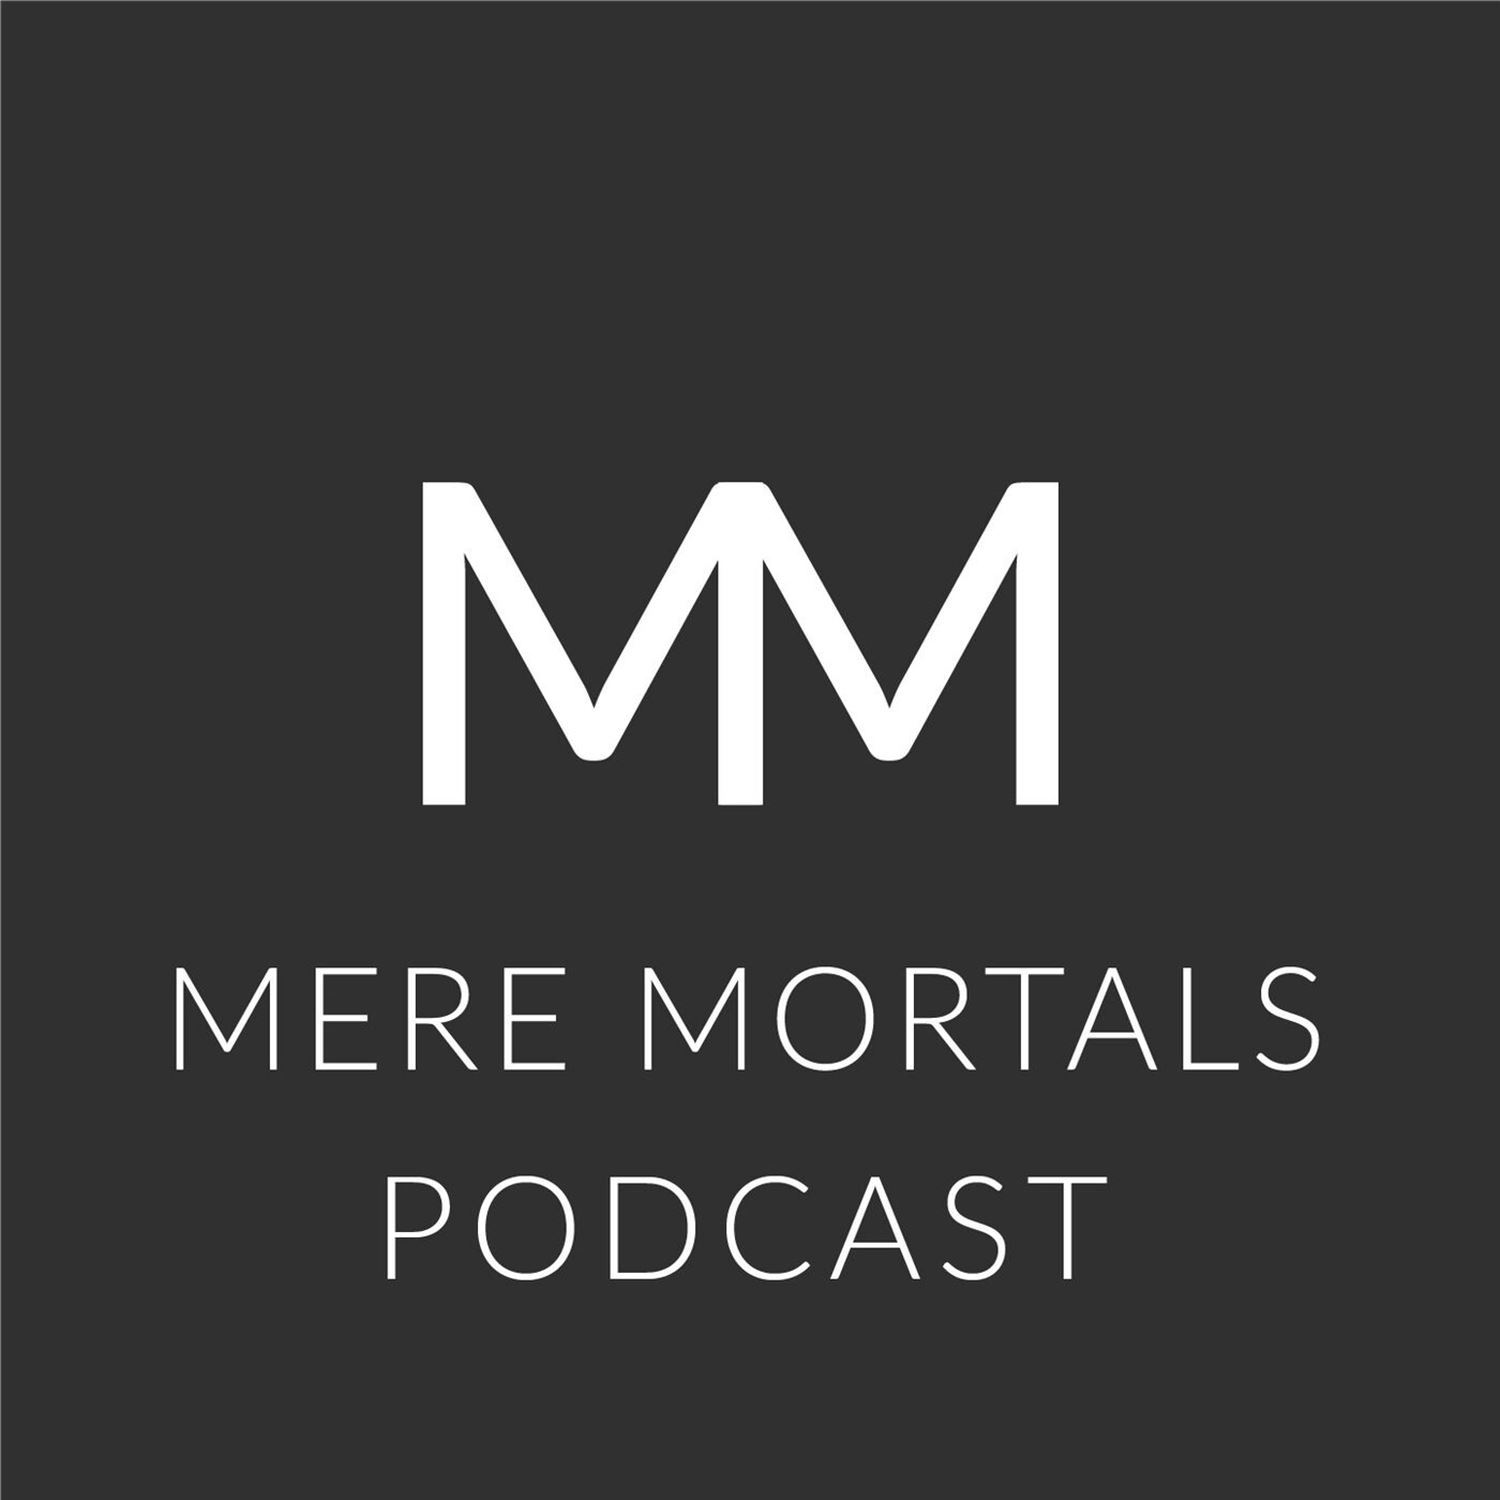 Put Another Shrimp On The Barbie Mate (Mere Mortals Episode #94 - Accents)